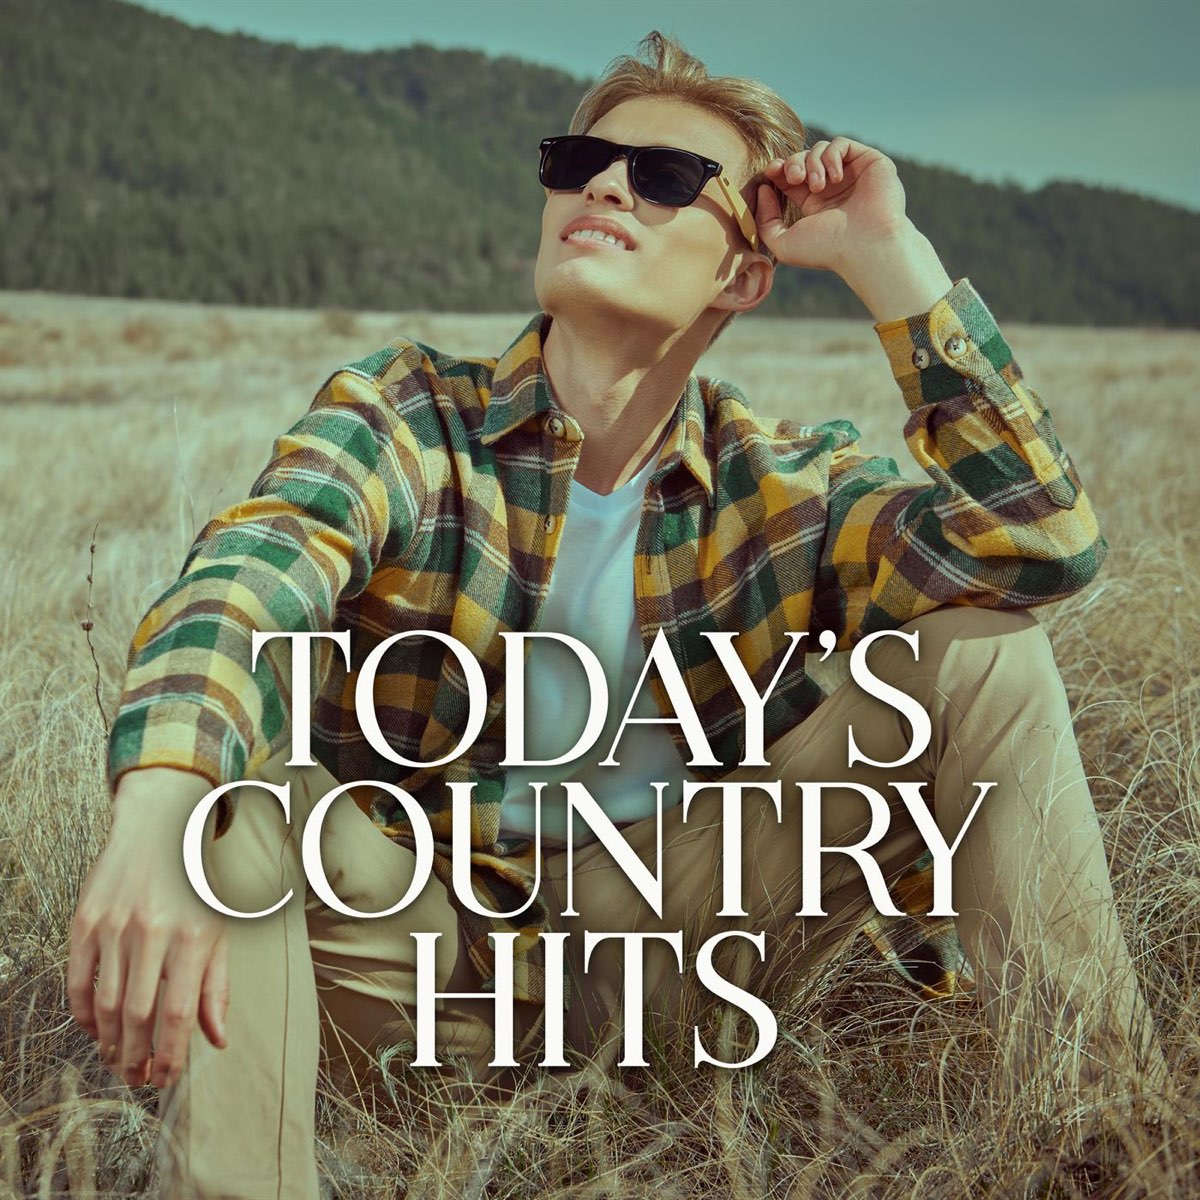 ‎Today's Country Hits by Various Artists on Apple Music